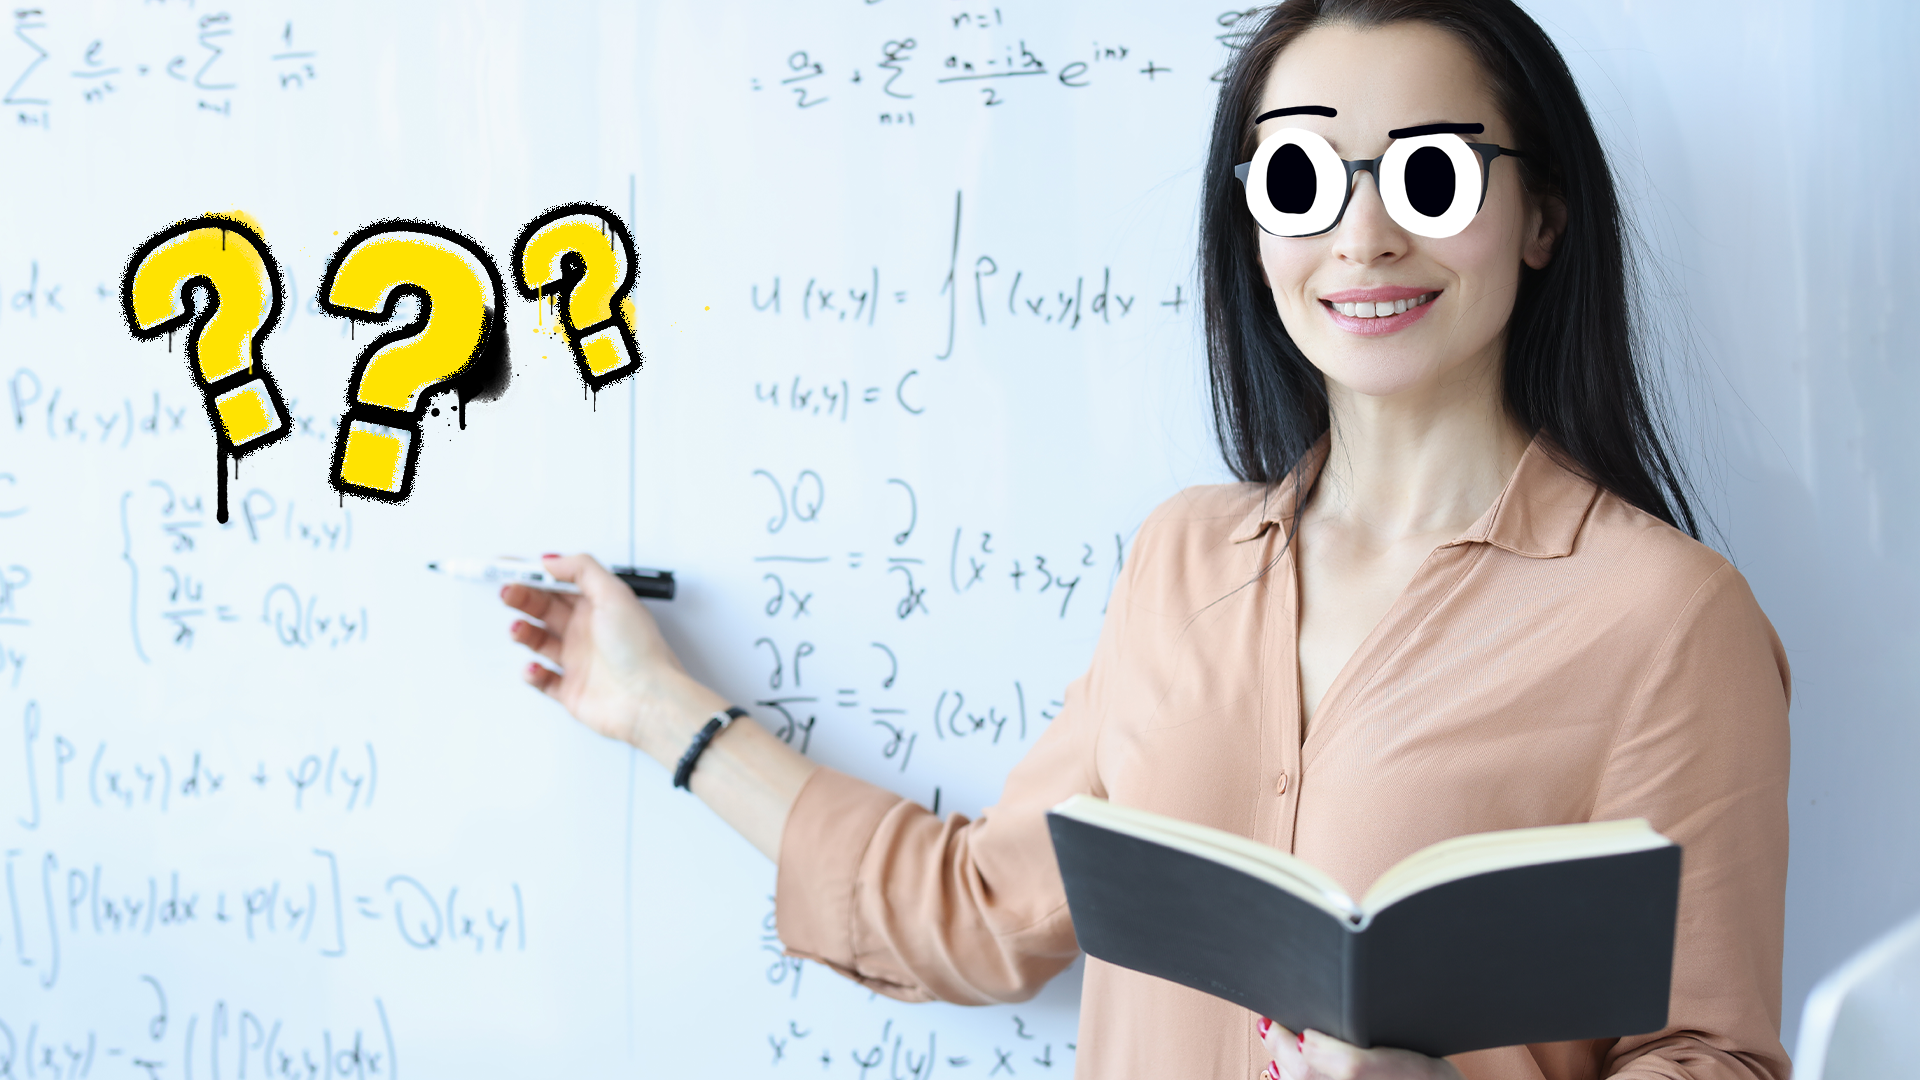 Woman pointing to whiteboard with question marks 